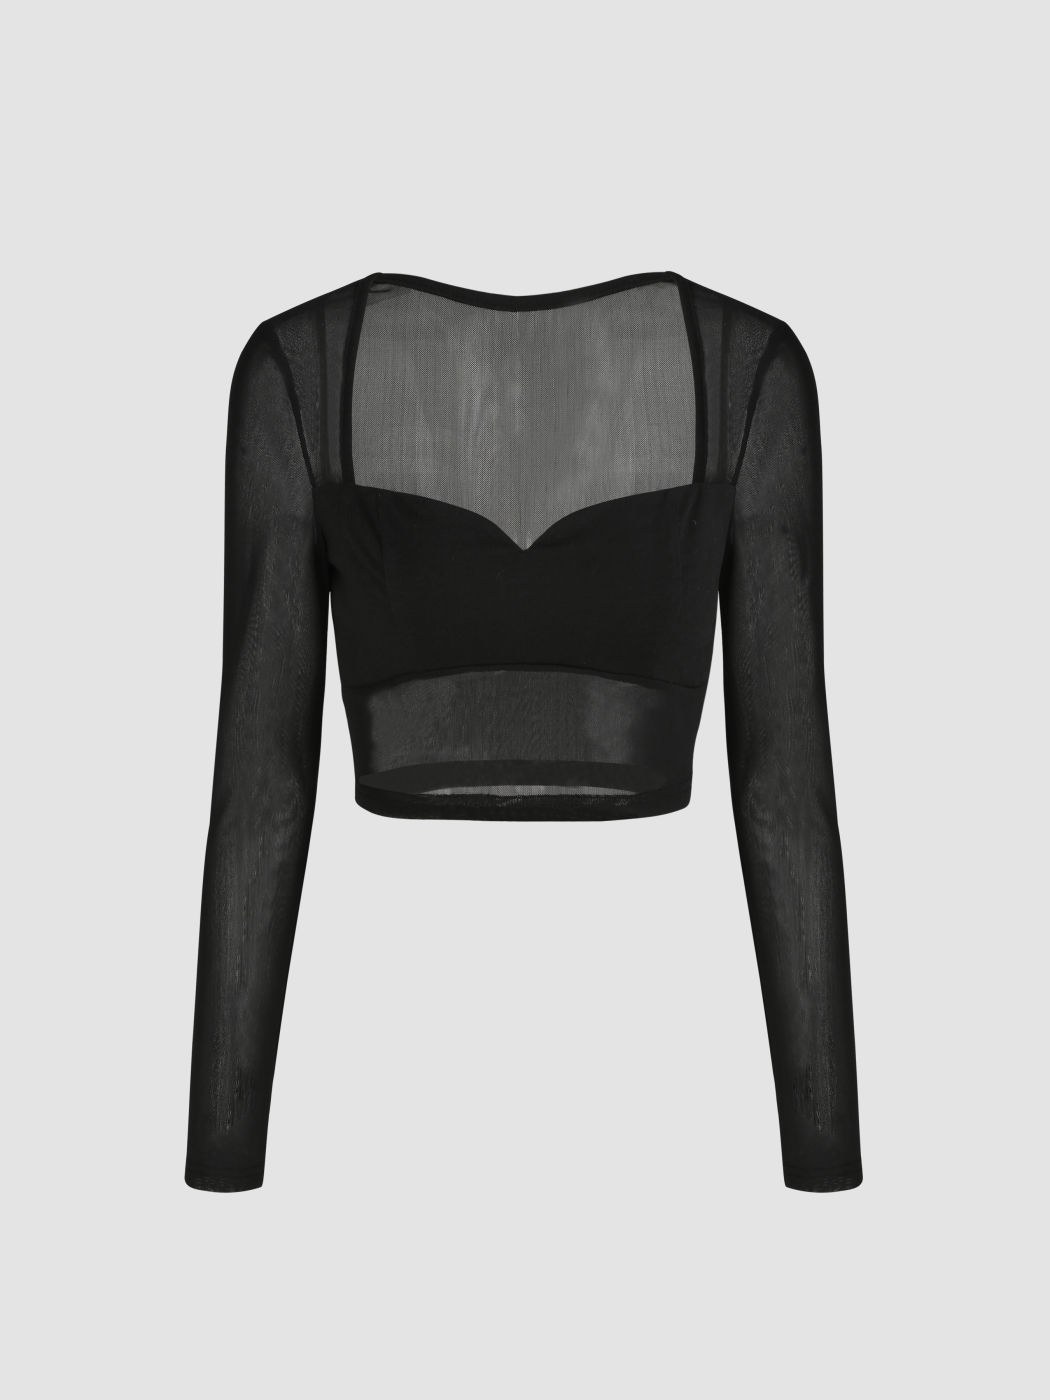 Mesh Sweetheart Crop Top For Party/Clubbing